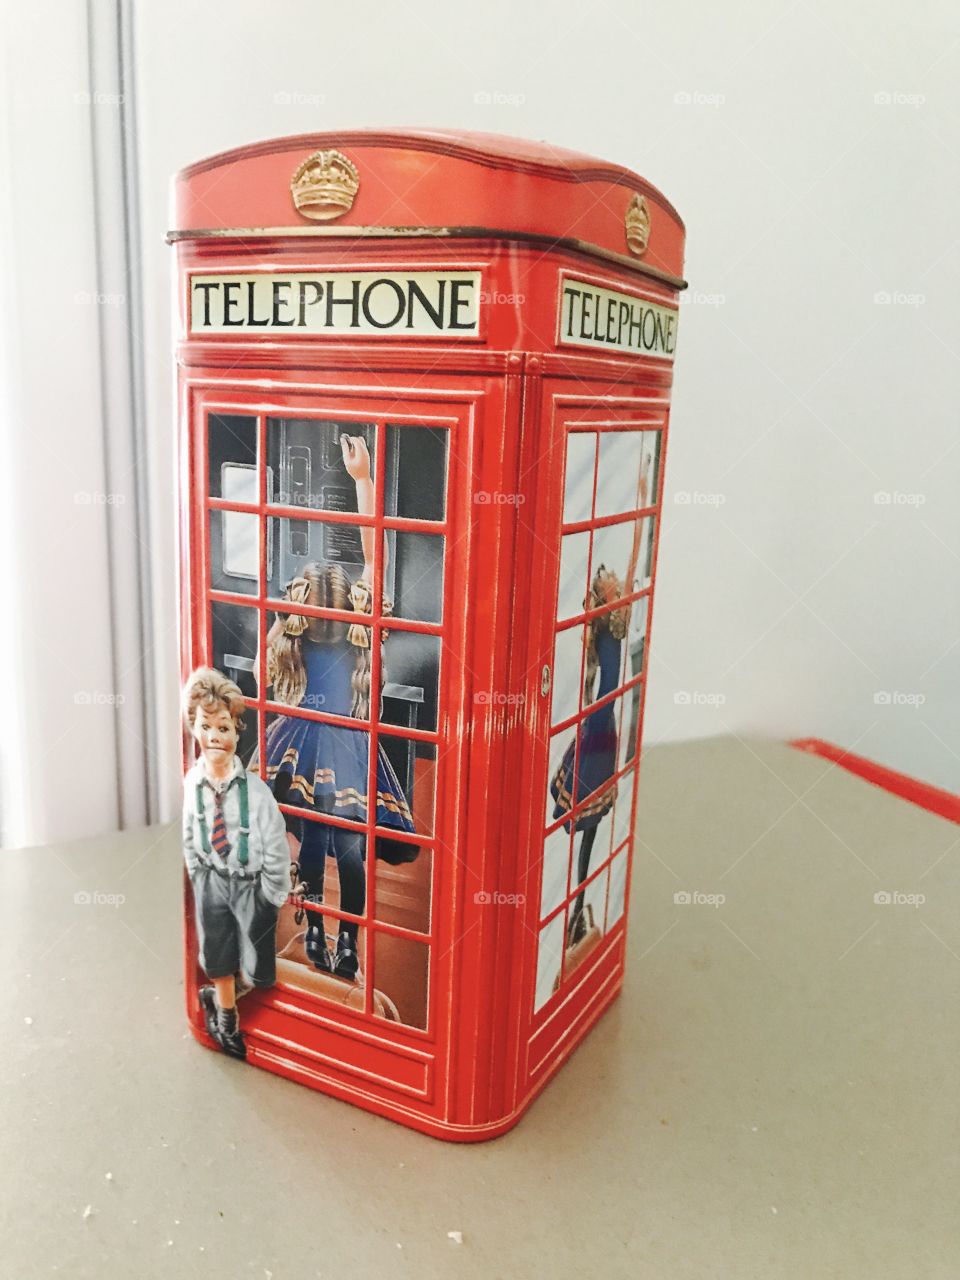 Telephone booth-phone-sweets